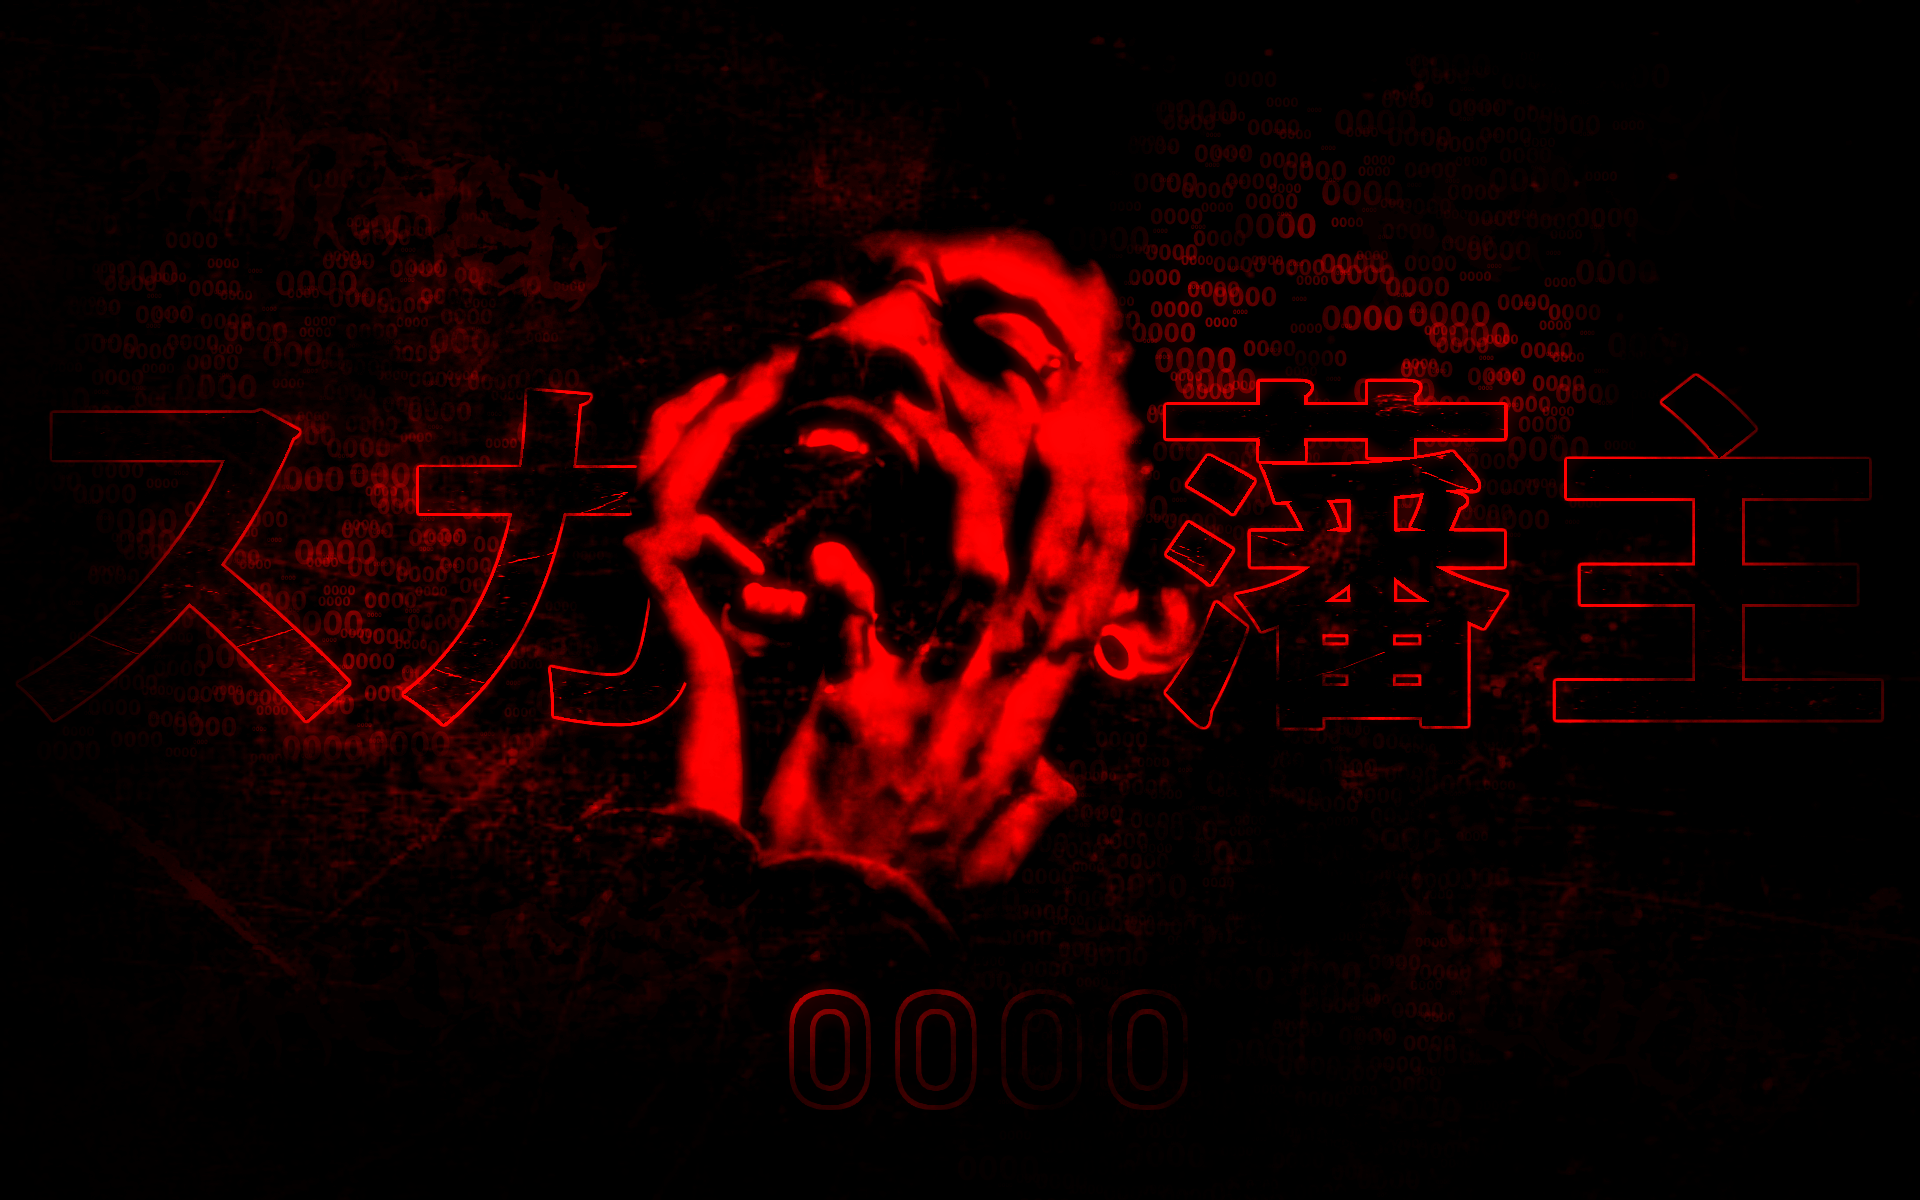 Scarlxrd wallpaper I just made. Feel free to use